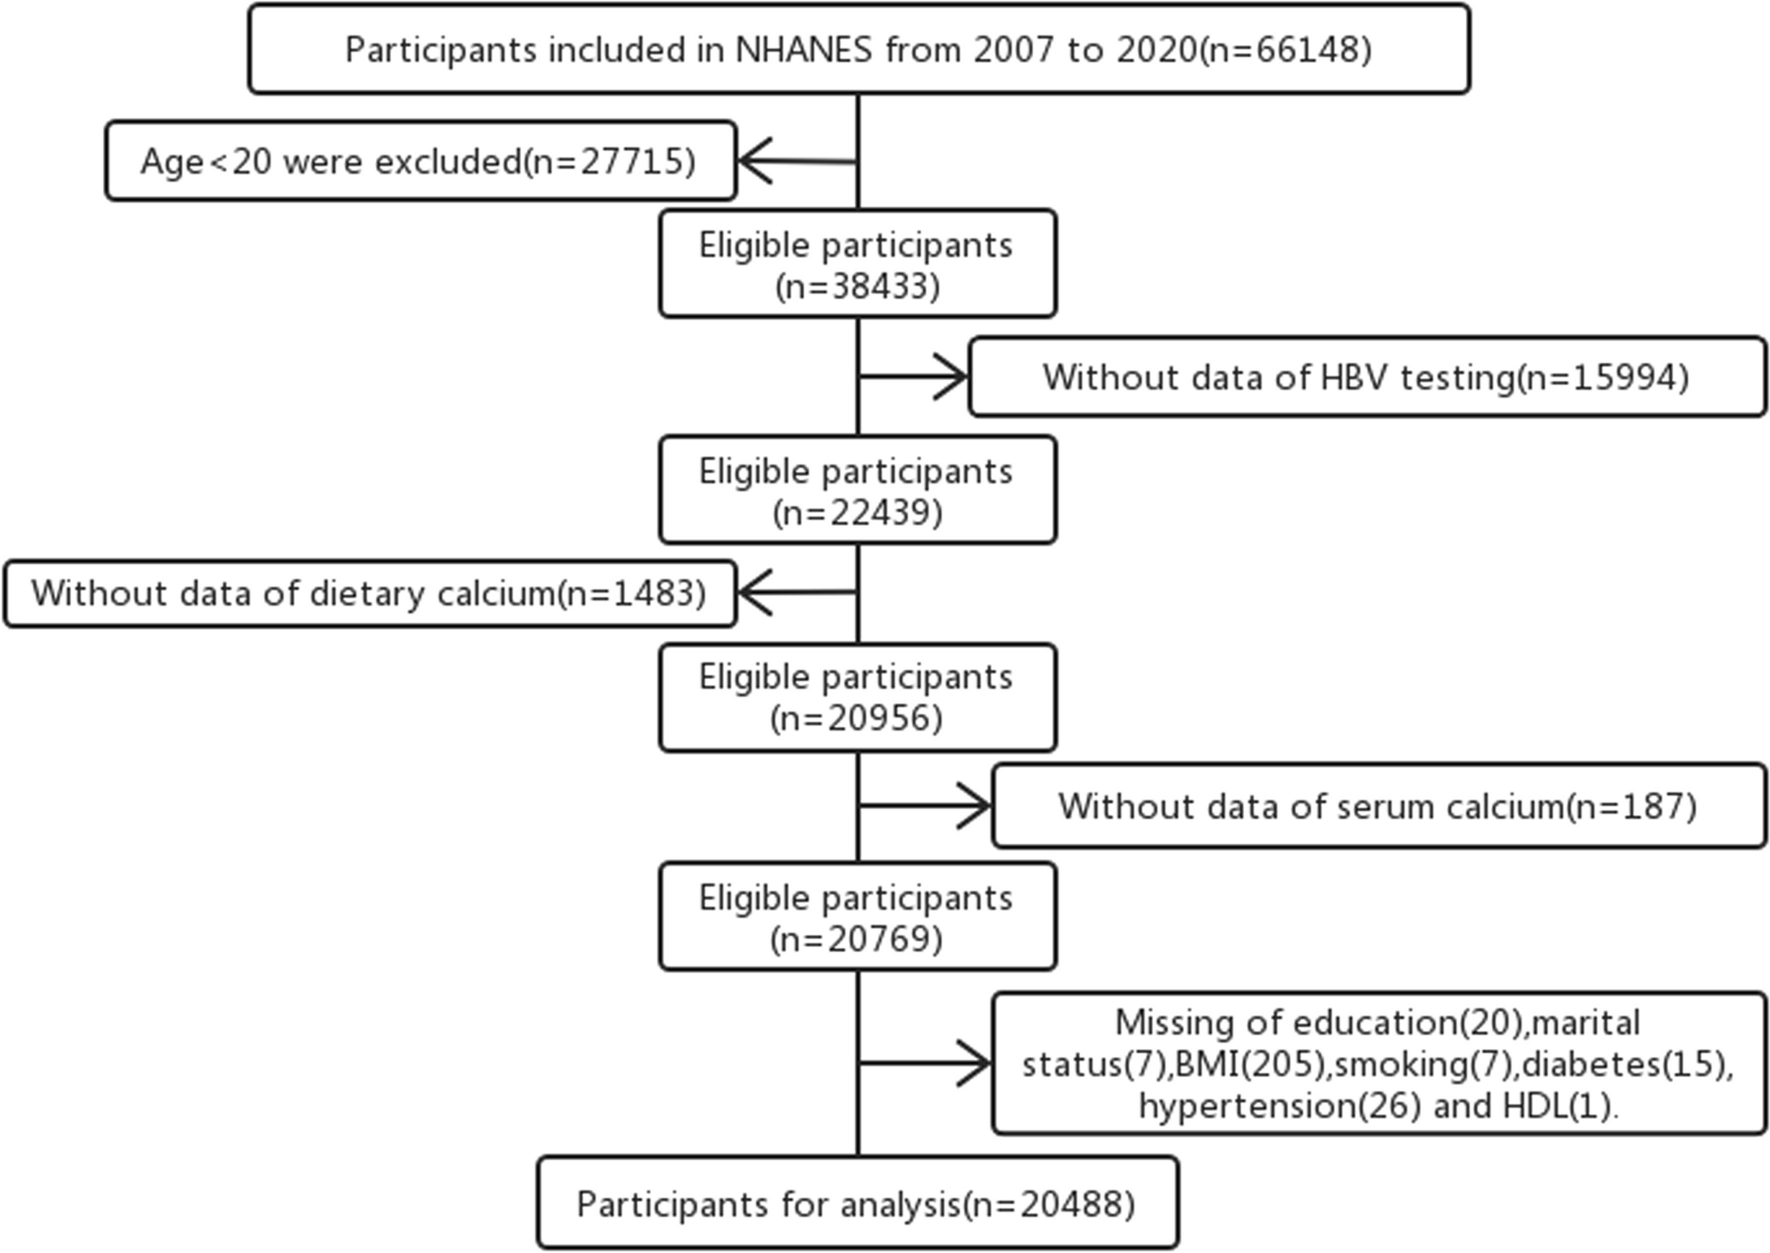 Dietary calcium is inversely associated with hepatitis B virus infection: an analysis of US National Health and Nutrition Examination Survey (NHANES) 2007–2020